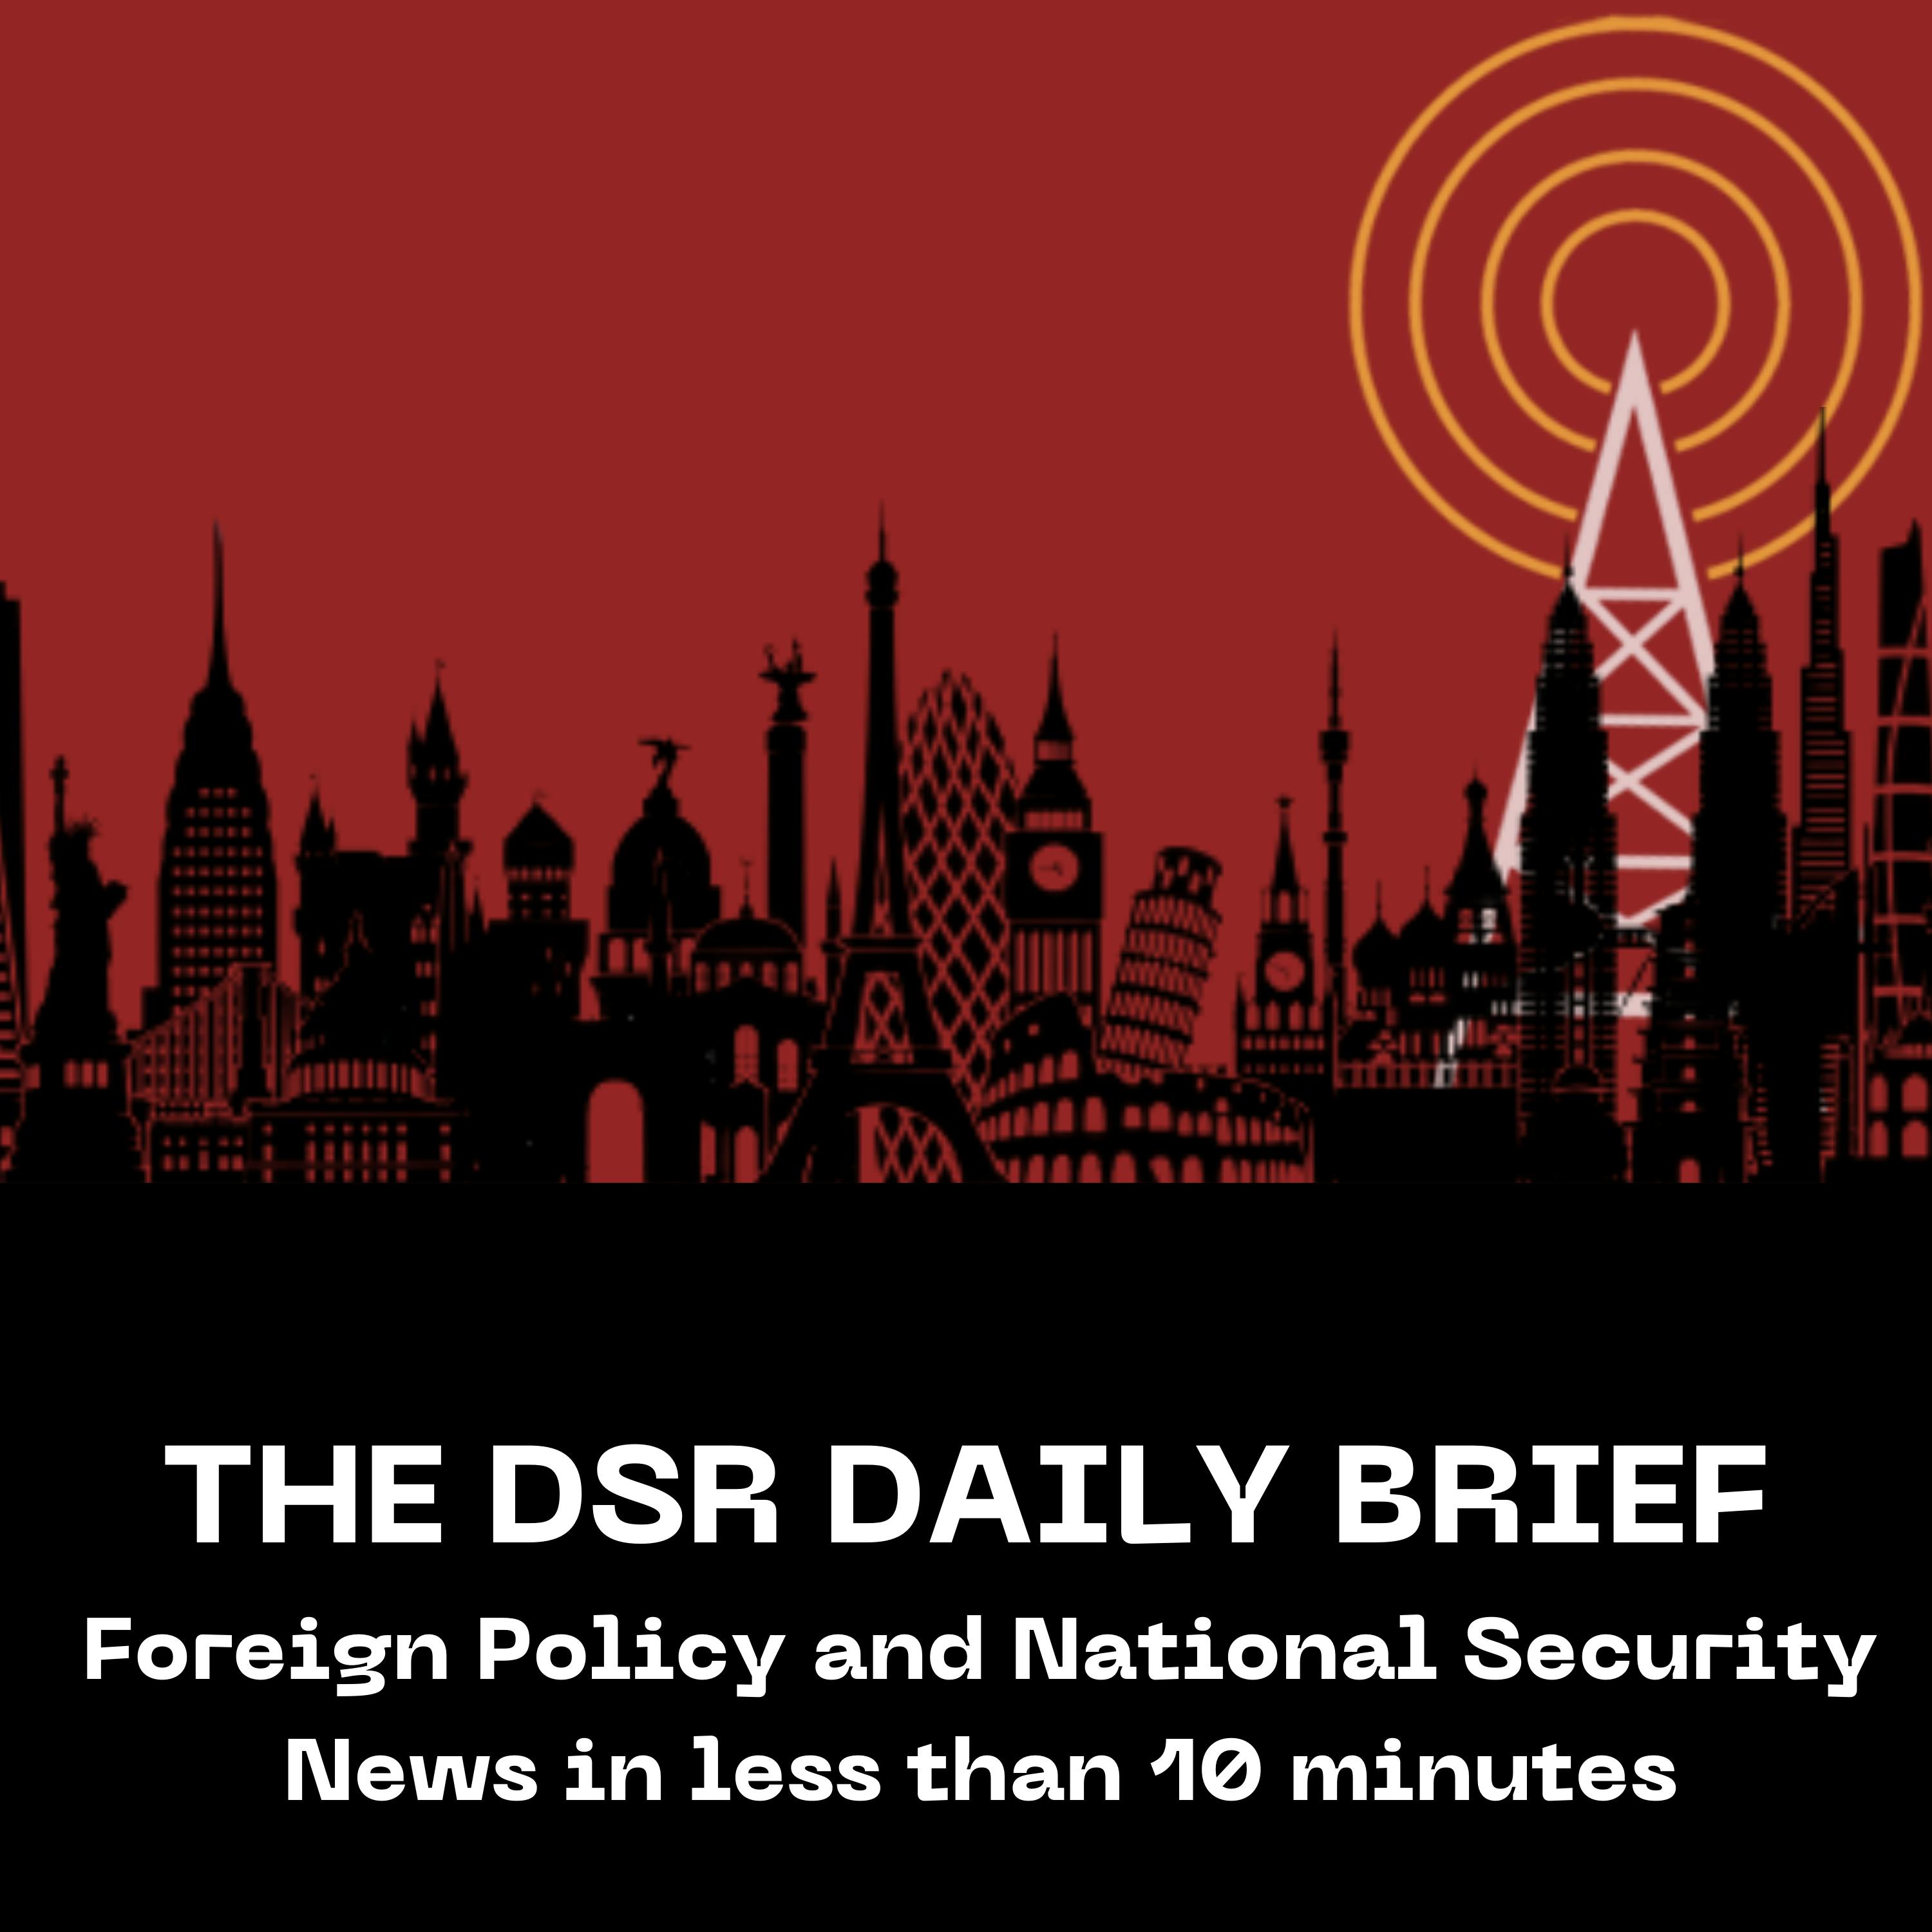 The DSR Daily for April 1: Thousands Protest Netanyahu in Israel, Opposition Stuns Erdogan in Turkish Elections